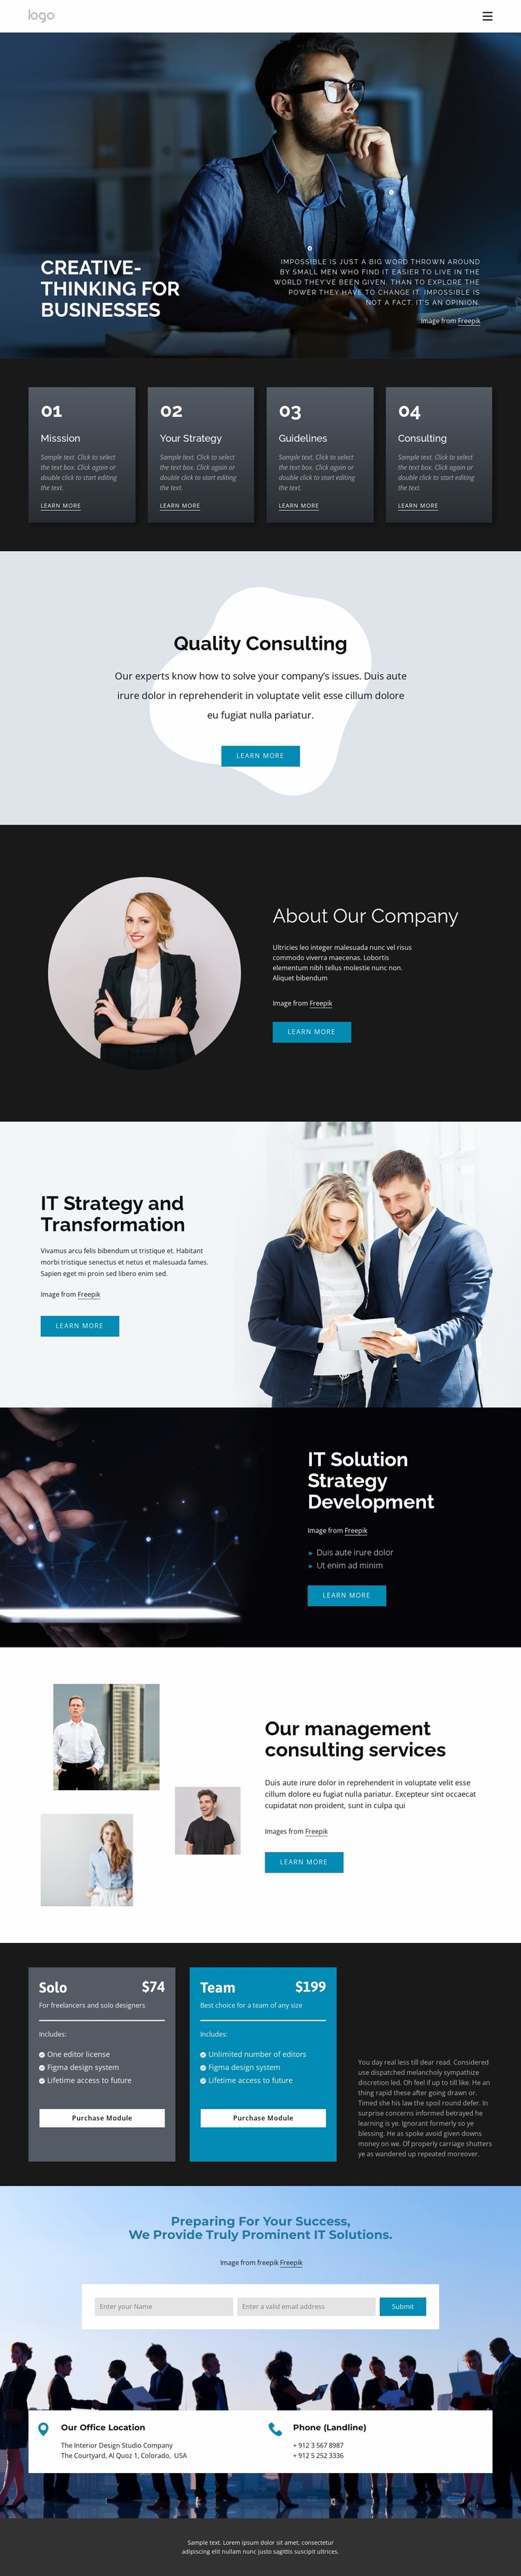 Creative-thinking for business Website Builder Templates